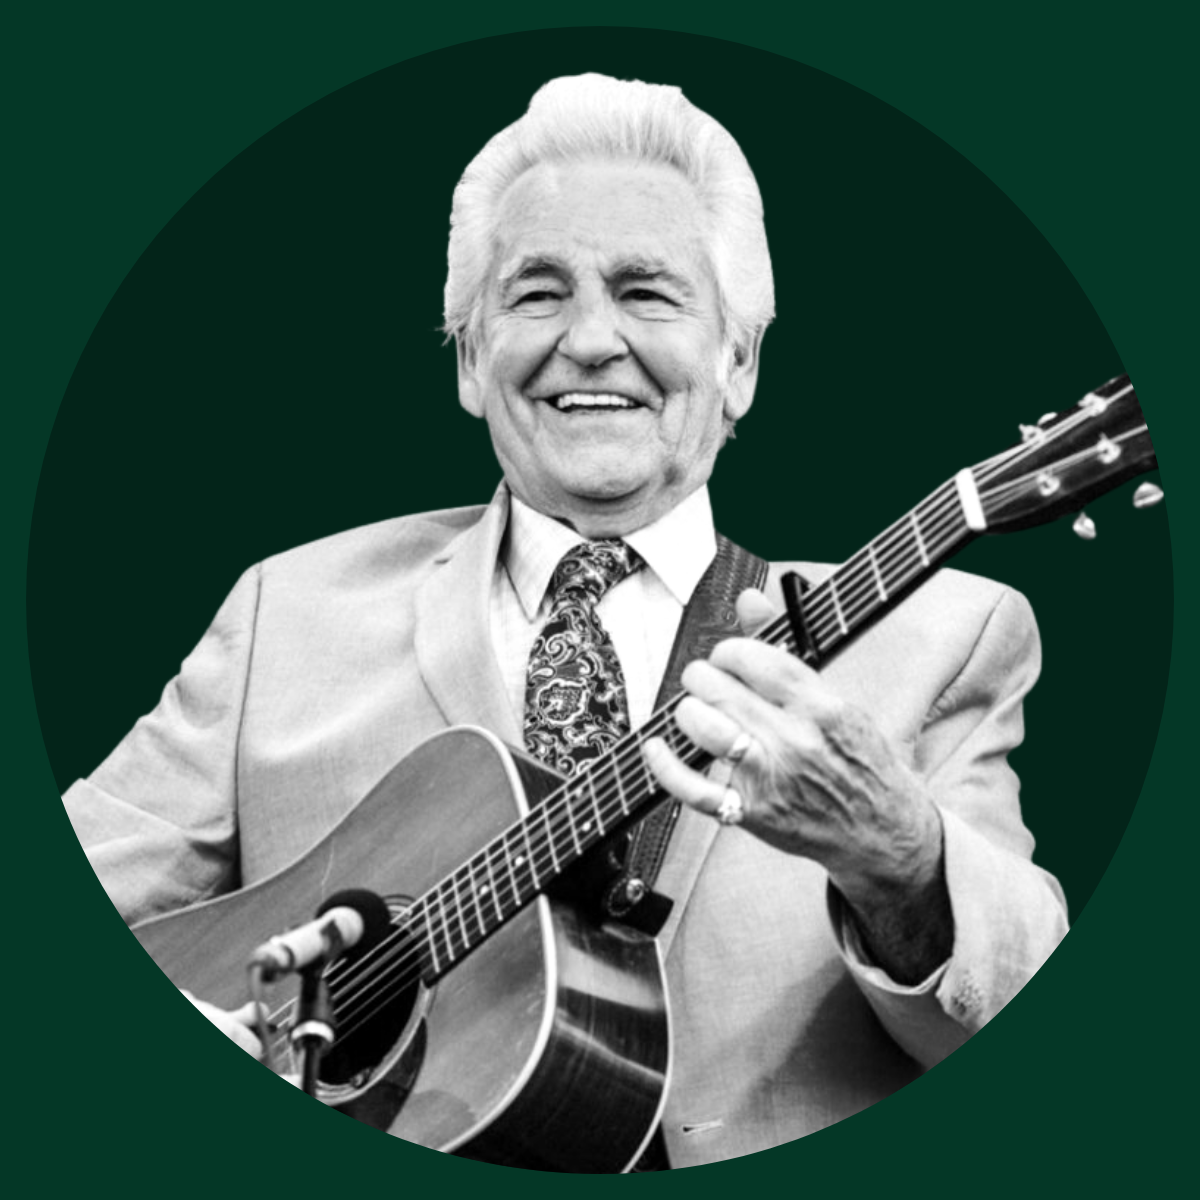 Del McCoury: Whatever Suits the Song